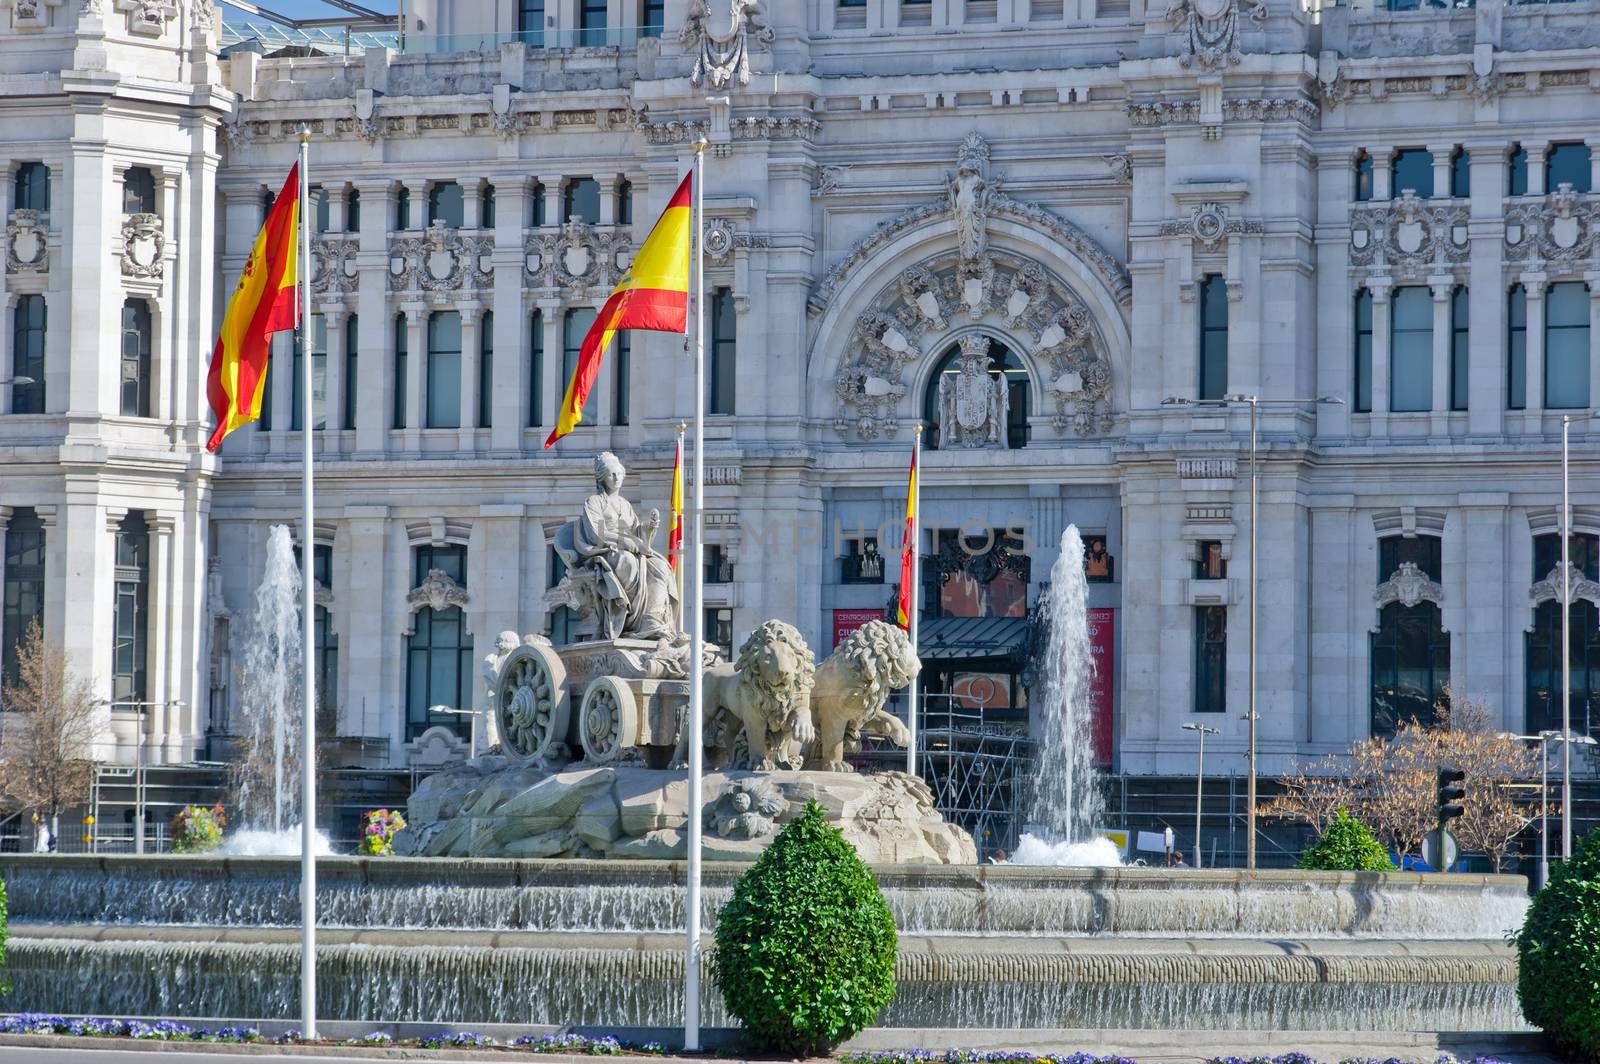 Fountain on Cybele Square (Plaza de Cibeles) with Cybele Palace (Palacio de Cibeles) on background in Madrid, Spain